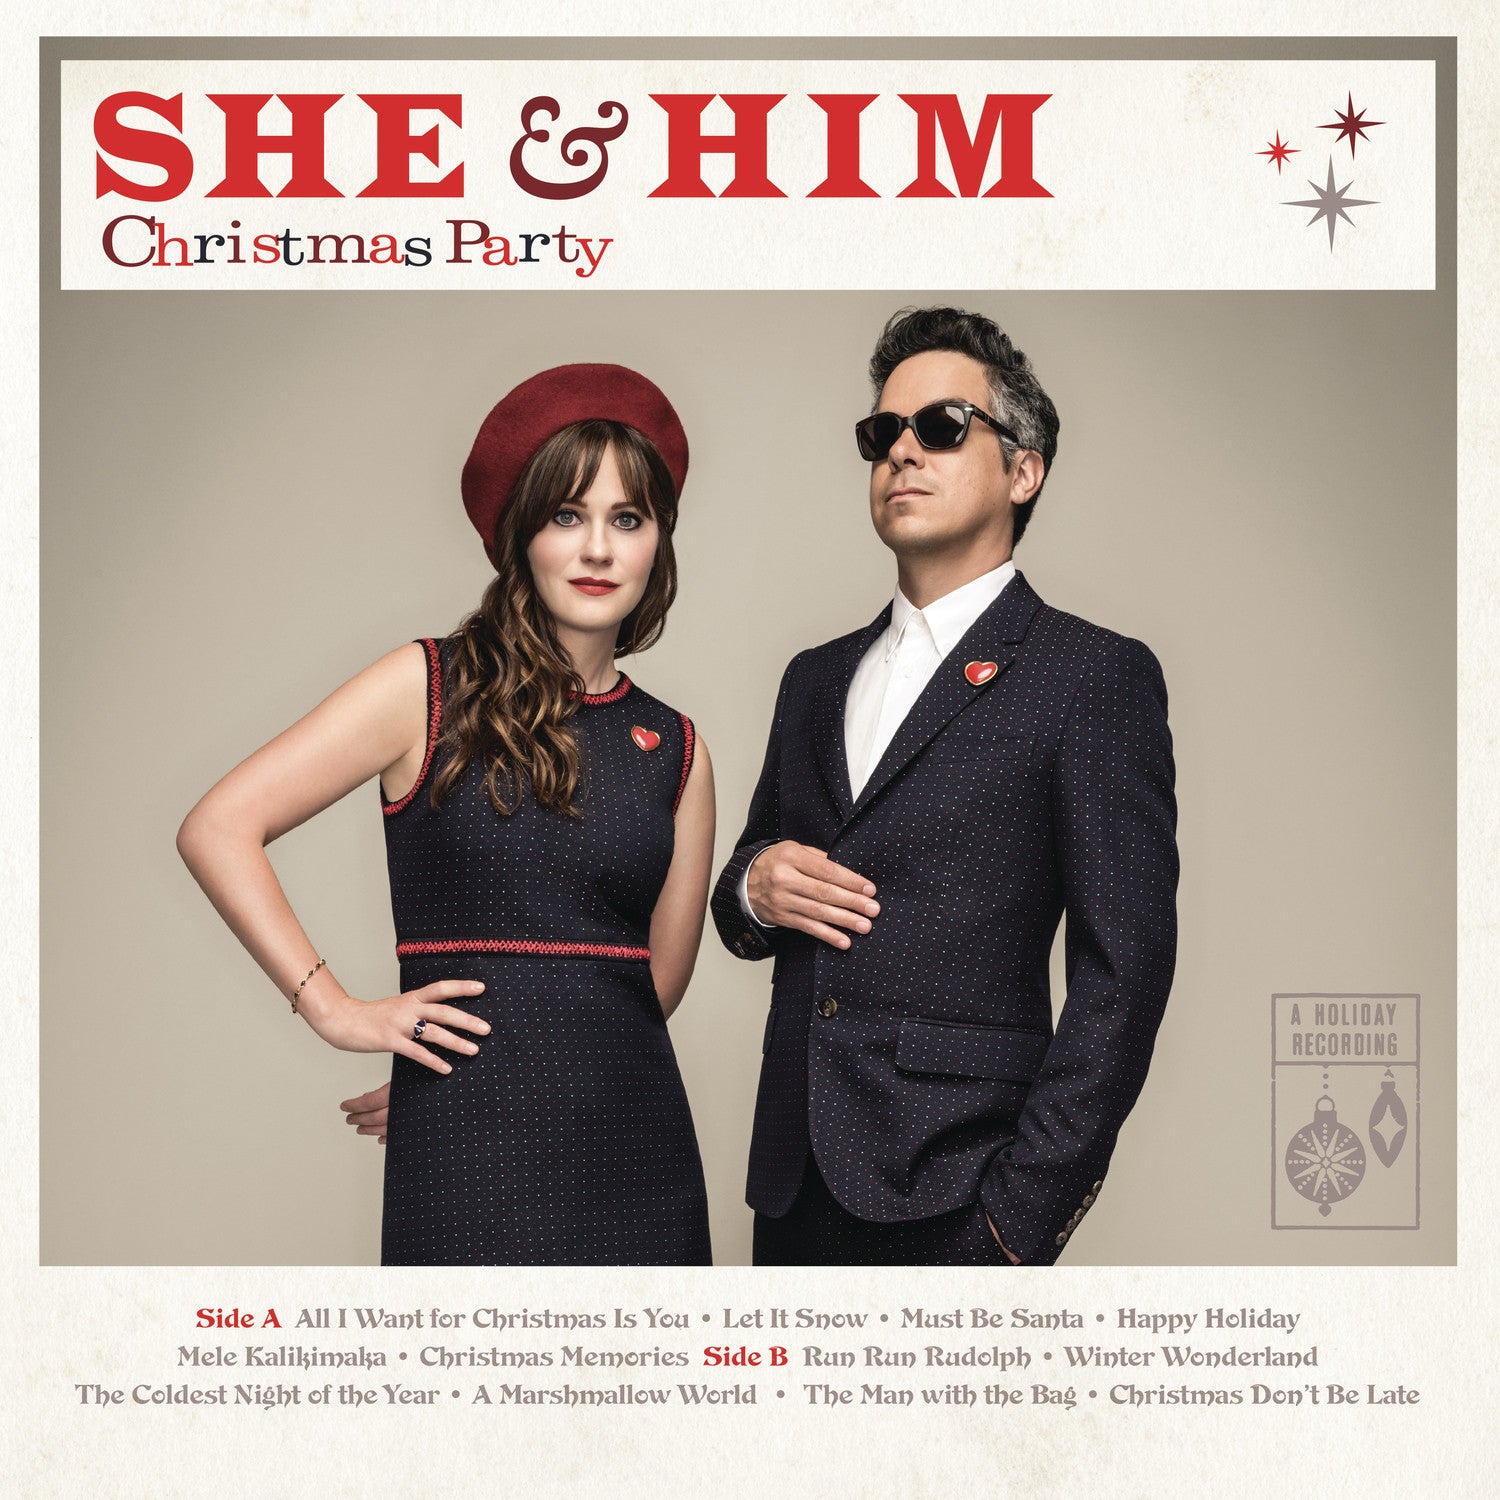 She & Him - Christmas Party - New Vinyl 2016 Columbia Records LP + Download. M. Ward + Zooey Deschanel back with 12 Classic Holiday Cuts. - Indie Folk / Pop / Holiday